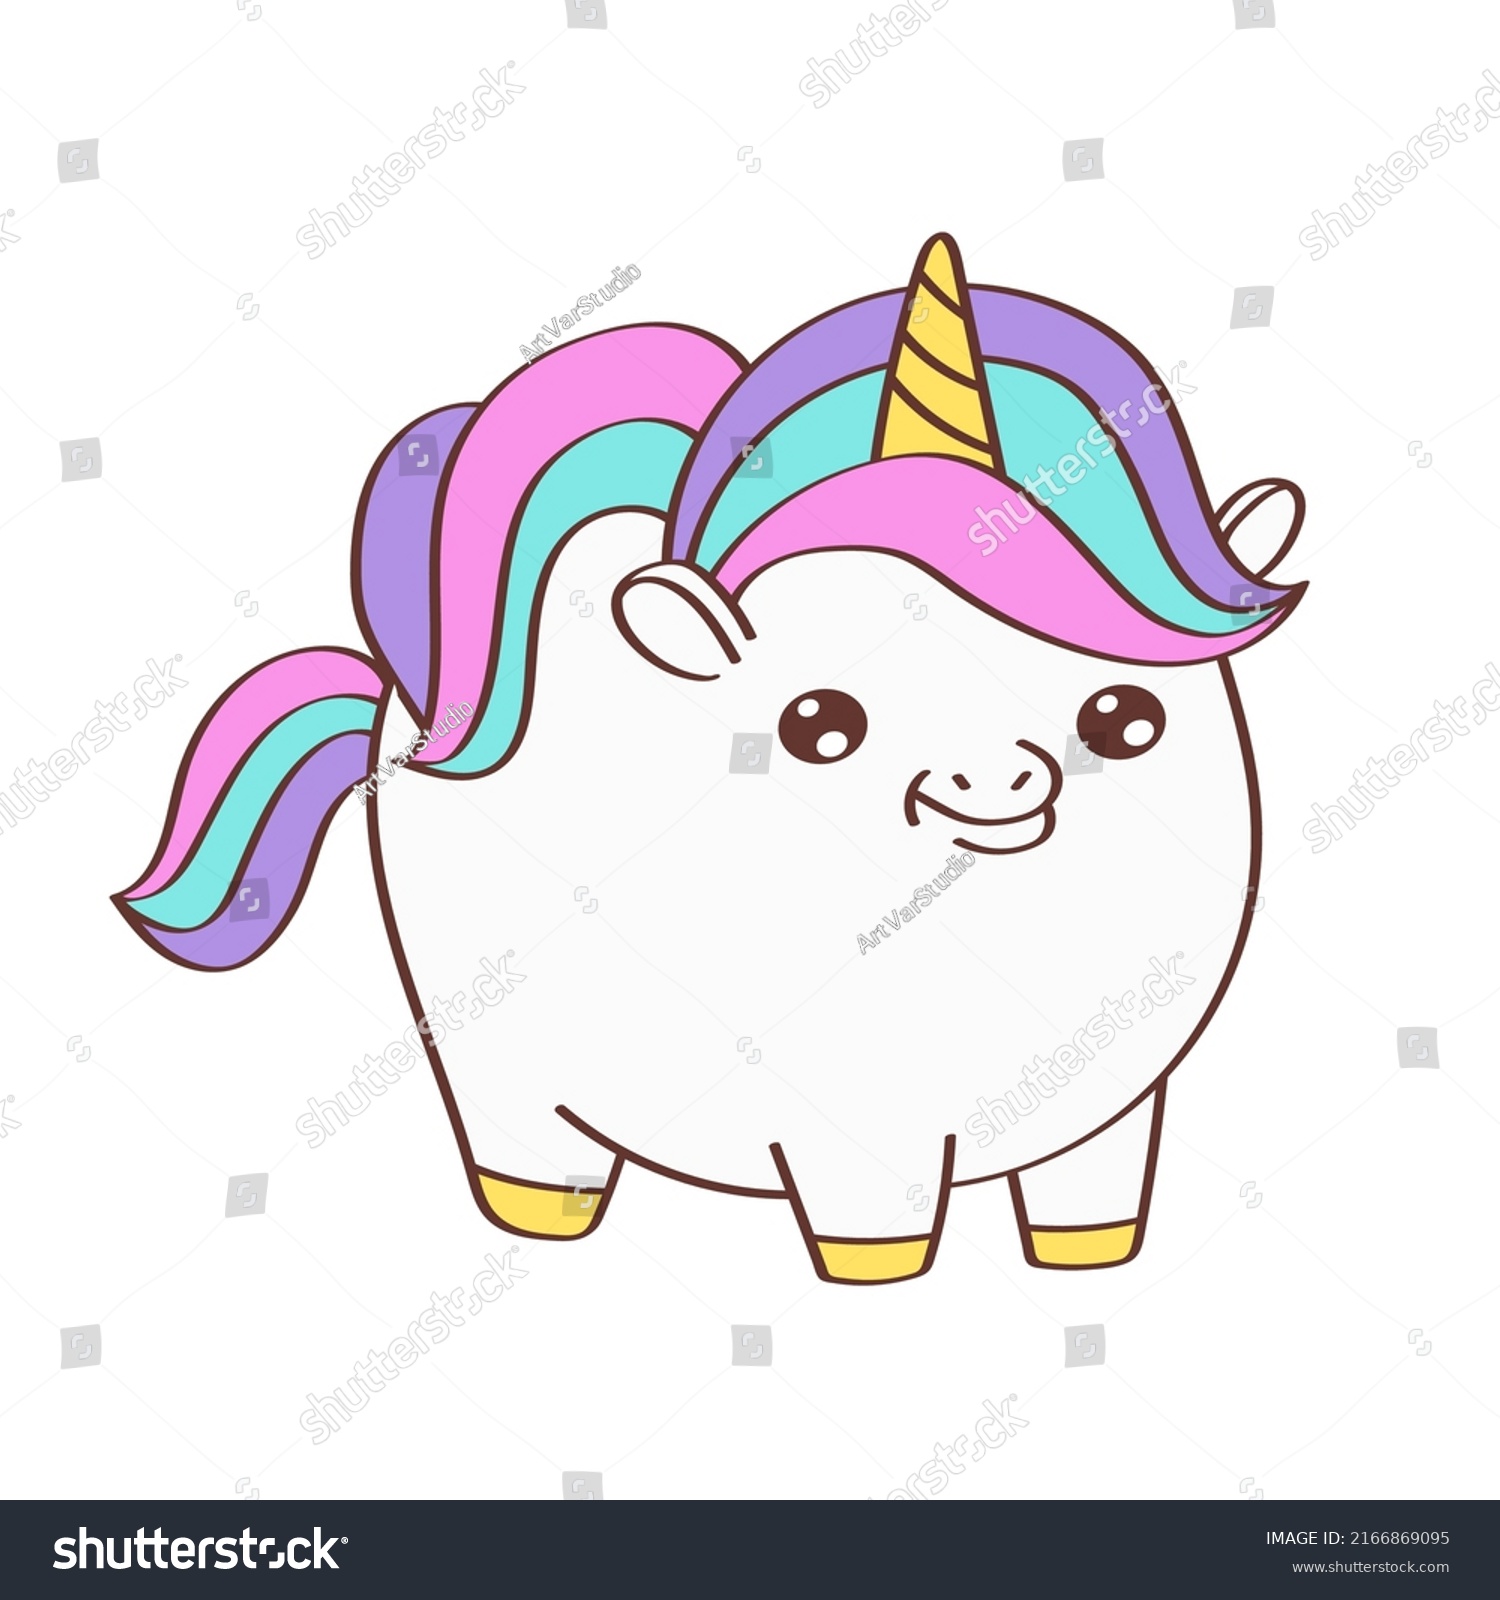 SVG of Cute Unicorn Clipart Isolated on White Background. Funny Clip Art Unicorn Plump. Vector Illustration of an Animal for Stickers, Baby Shower Invitation, Prints for Clothes.  svg